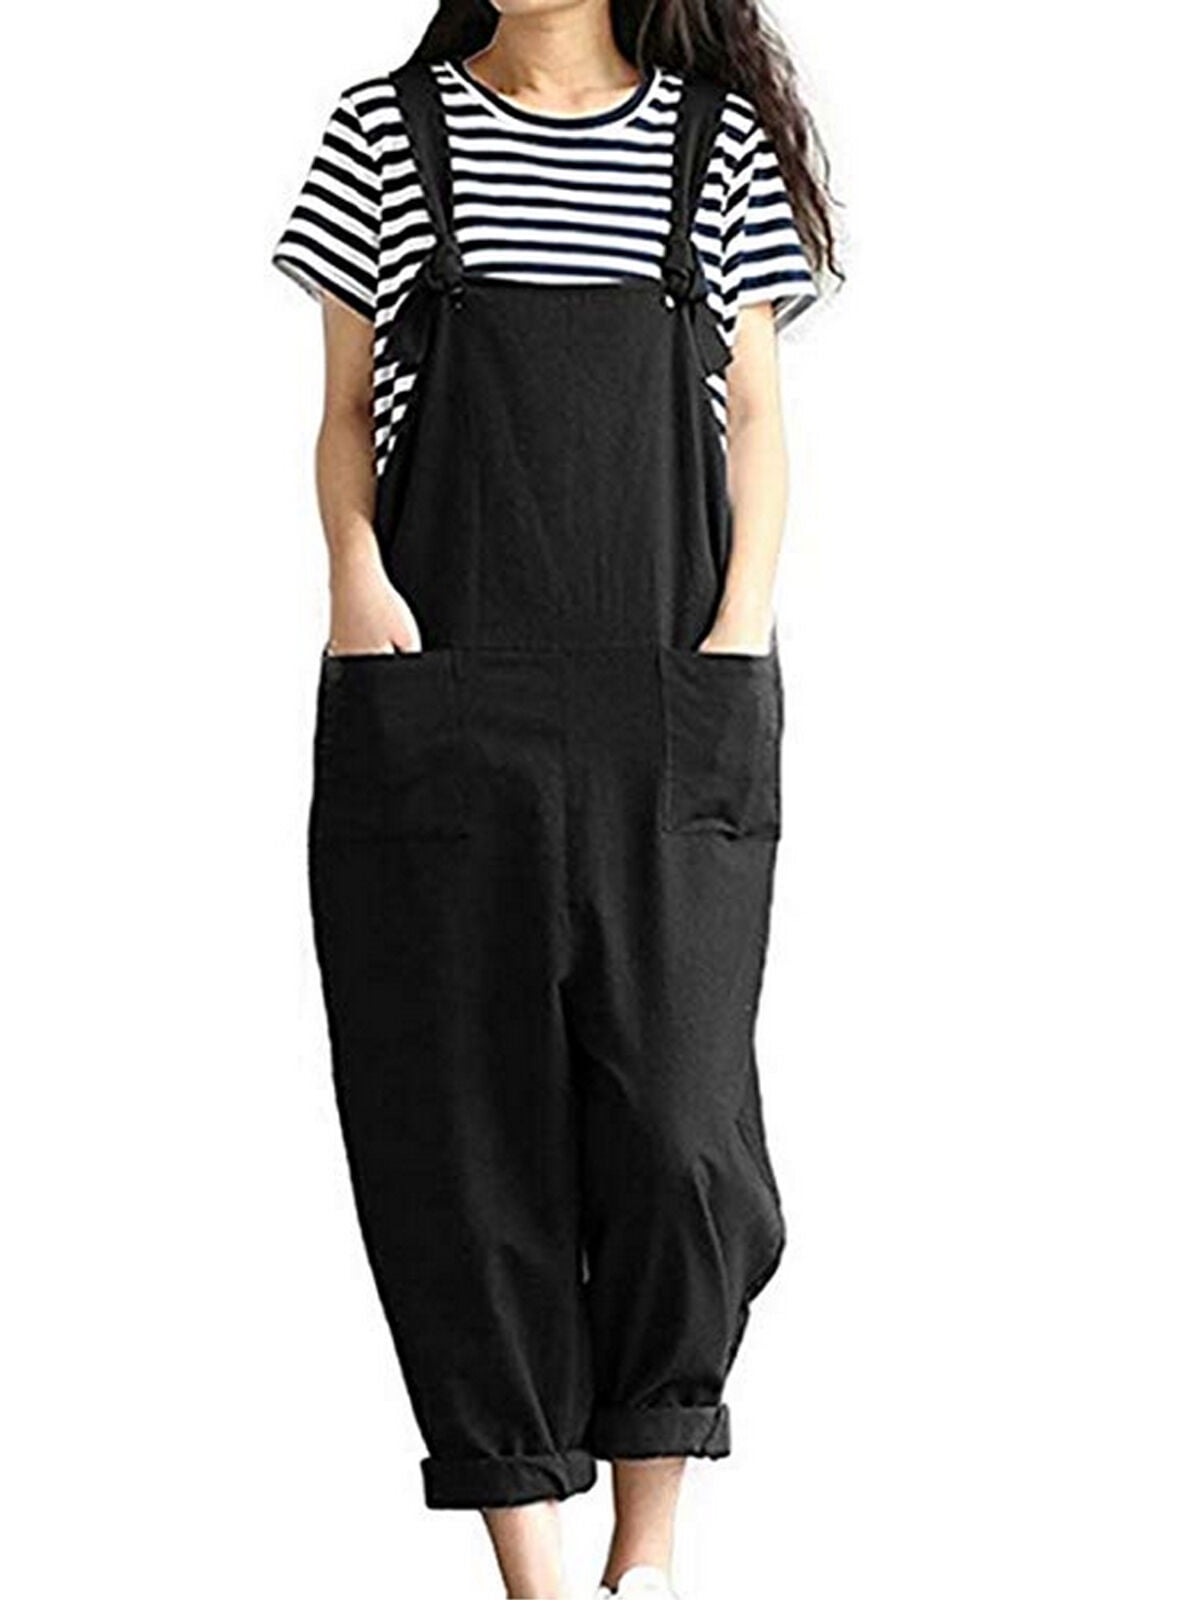 Womens Loose Dungarees Overalls Jumper Ladies Romper Oversized Baggy ...